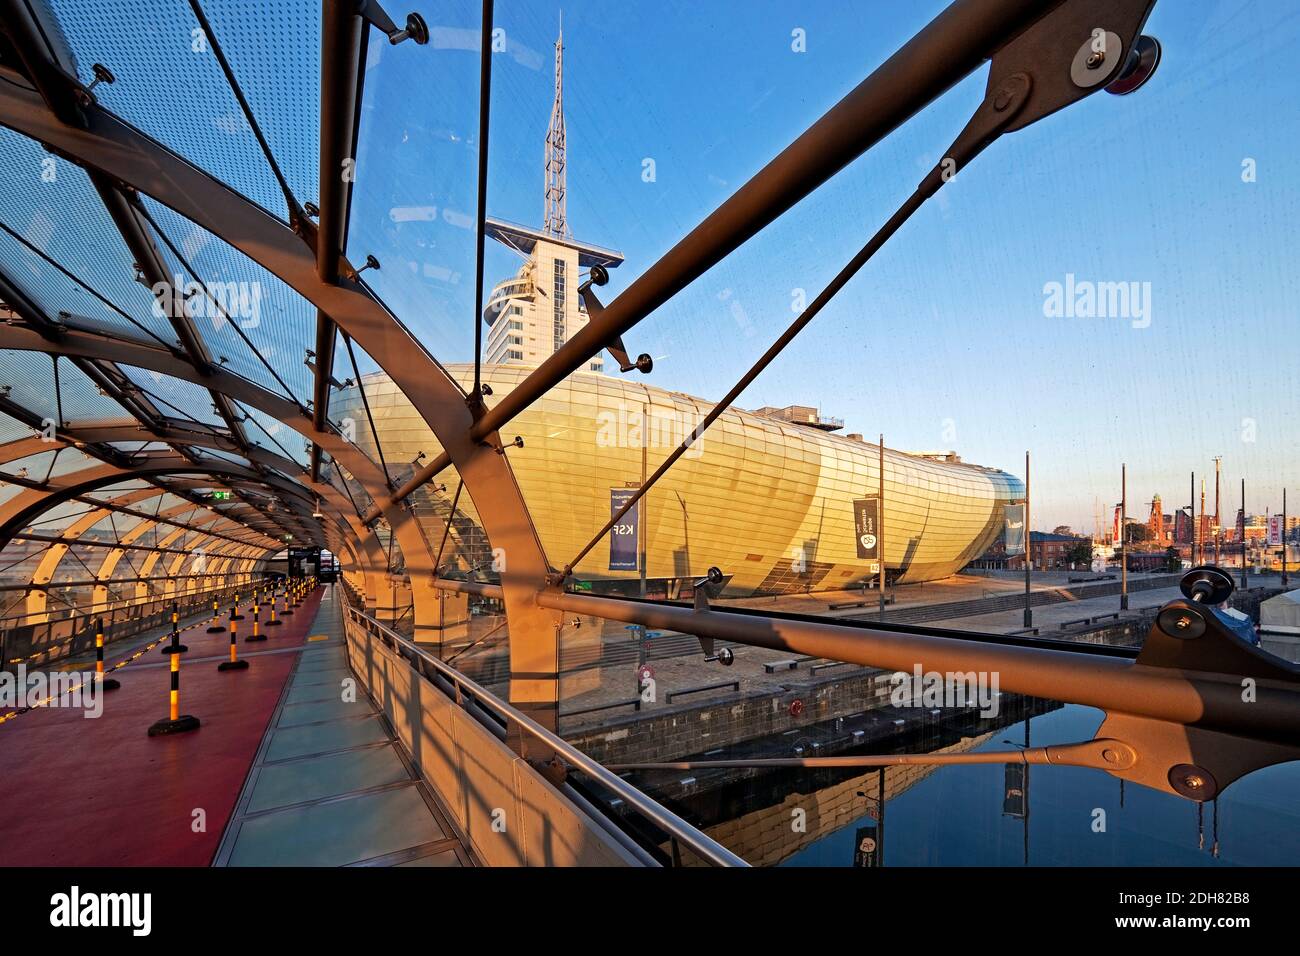 view from the glass bridge to the Alter Hafen, Klimahaus and Atlantic Hotel Sail City, Havenwelten, Germany, Bremen, Bremerhaven Stock Photo